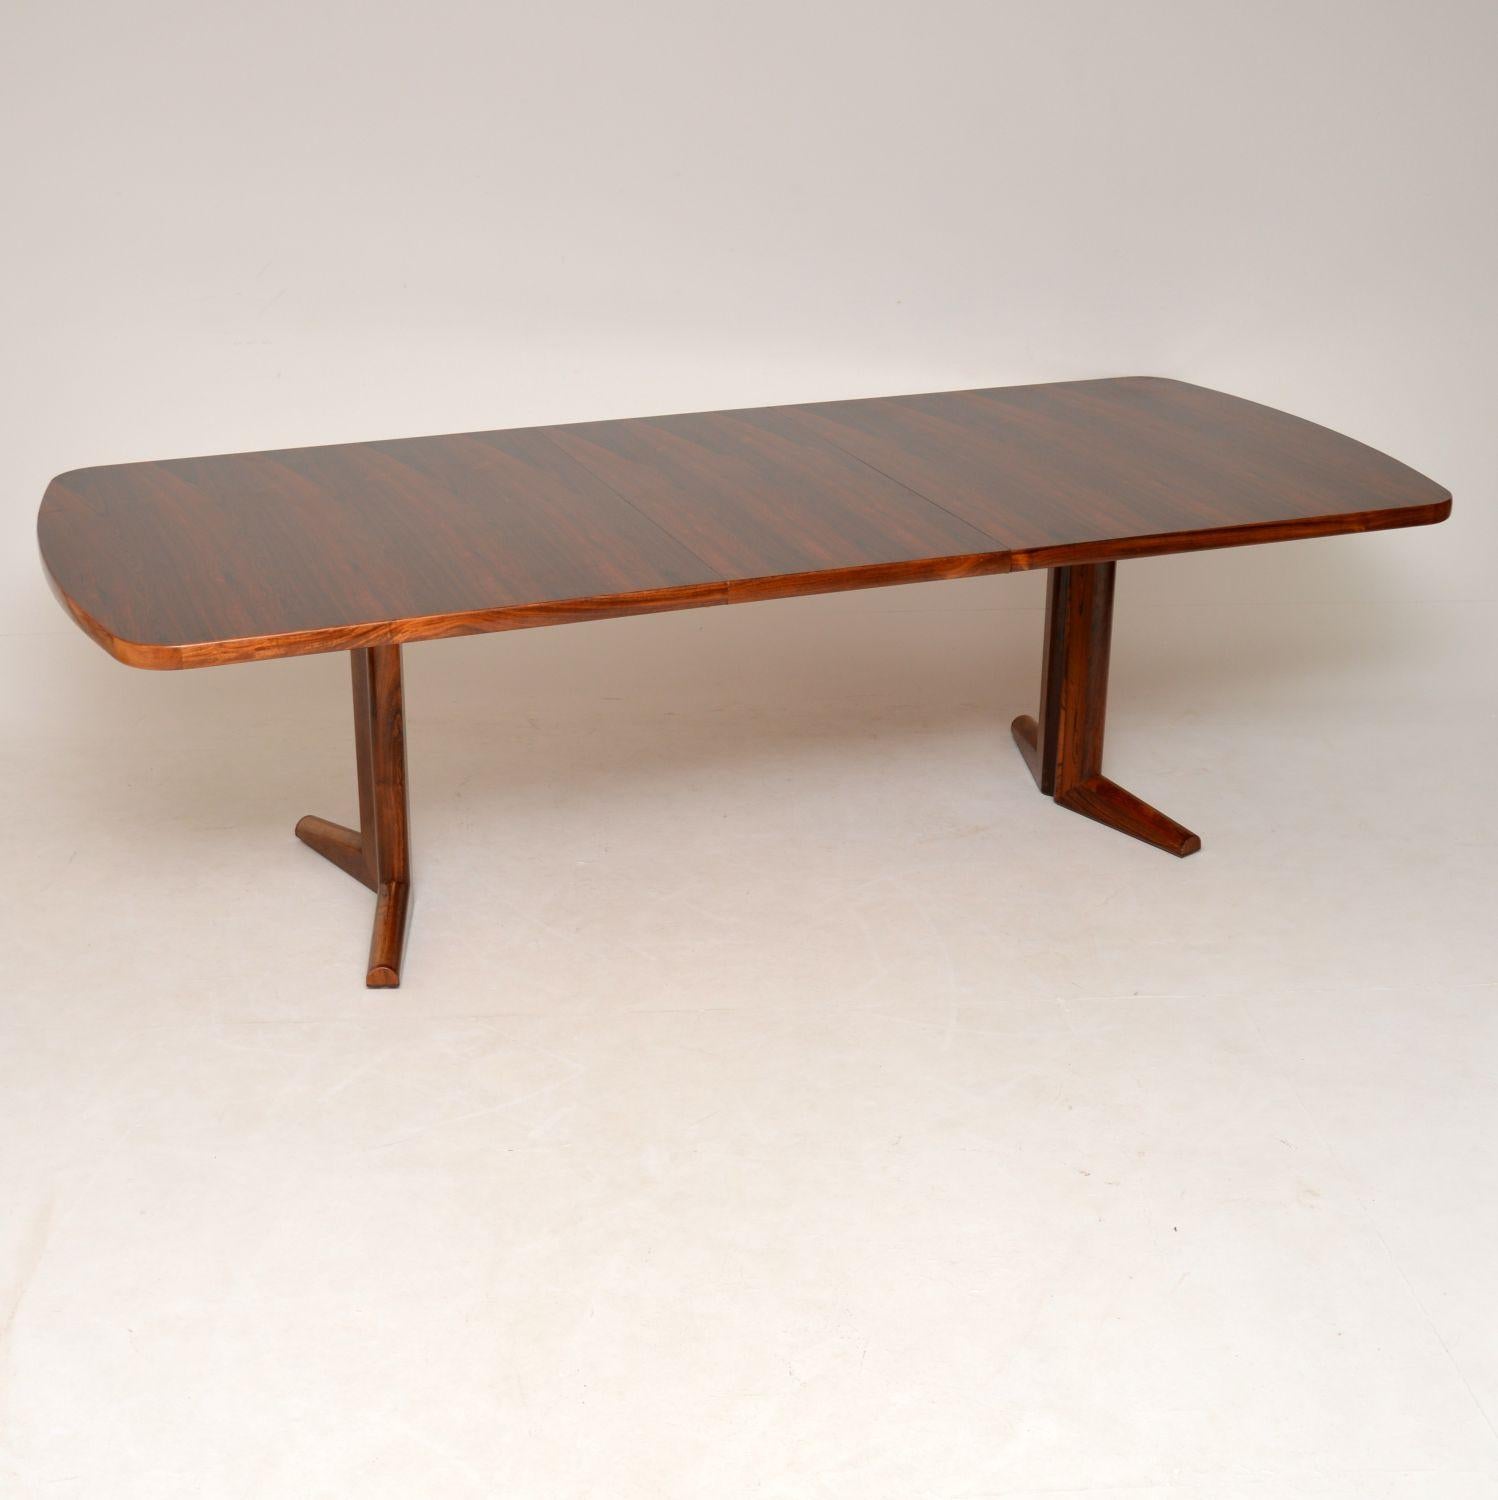 A magnificent vintage dining table which was designed by Martin Hall for Gordon Russell, it dates from the 1970s. This is of incredibly high quality and is in superb condition, with barely any wear to be seen. The color and grain patterns are